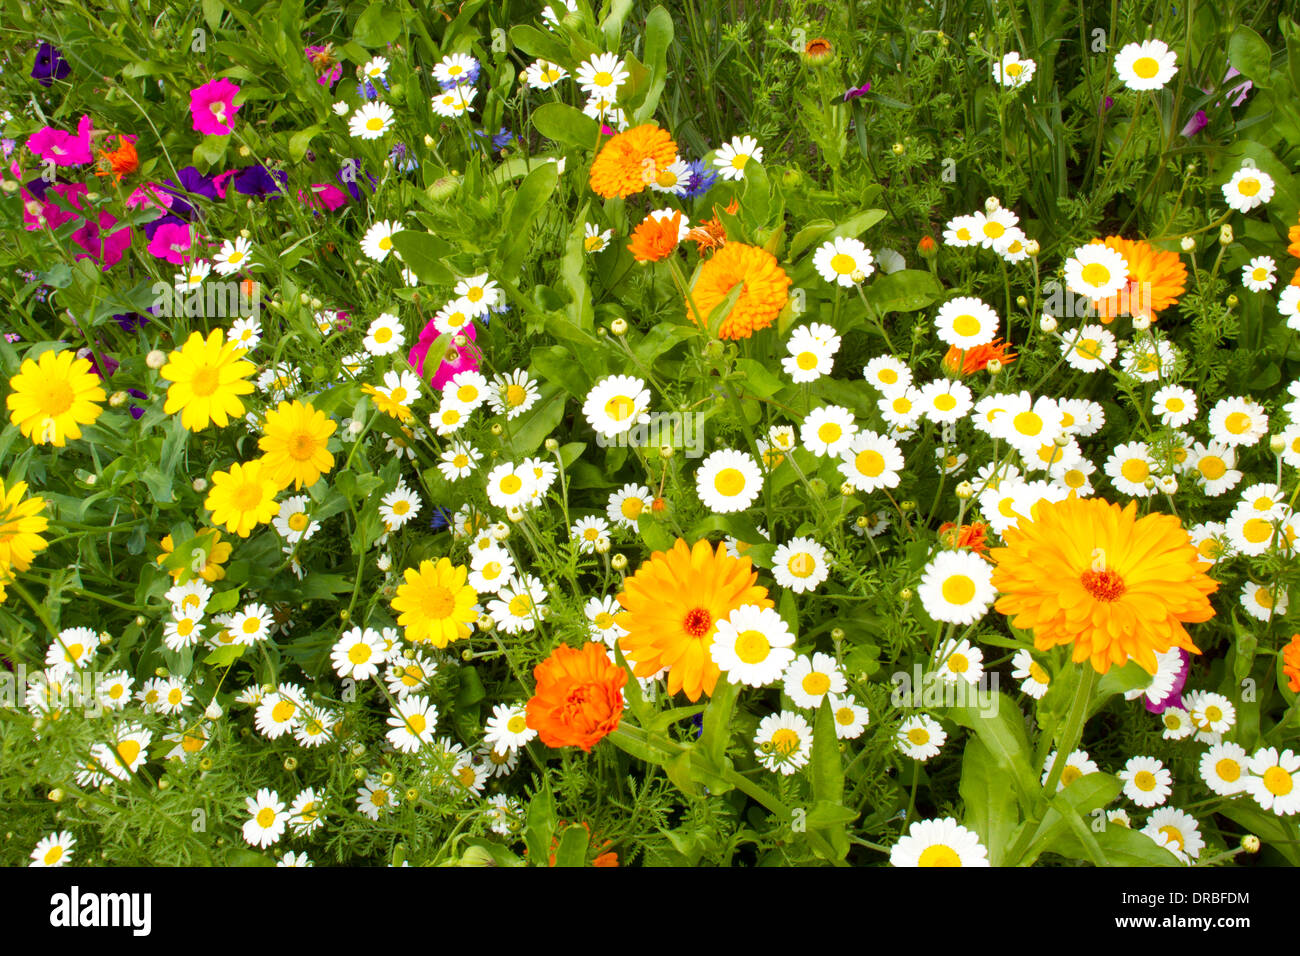 Mixed annual flowers (Anthemis, Tagetes, Calendula), flowering in a garden border. Powys, Wales. July. Stock Photo